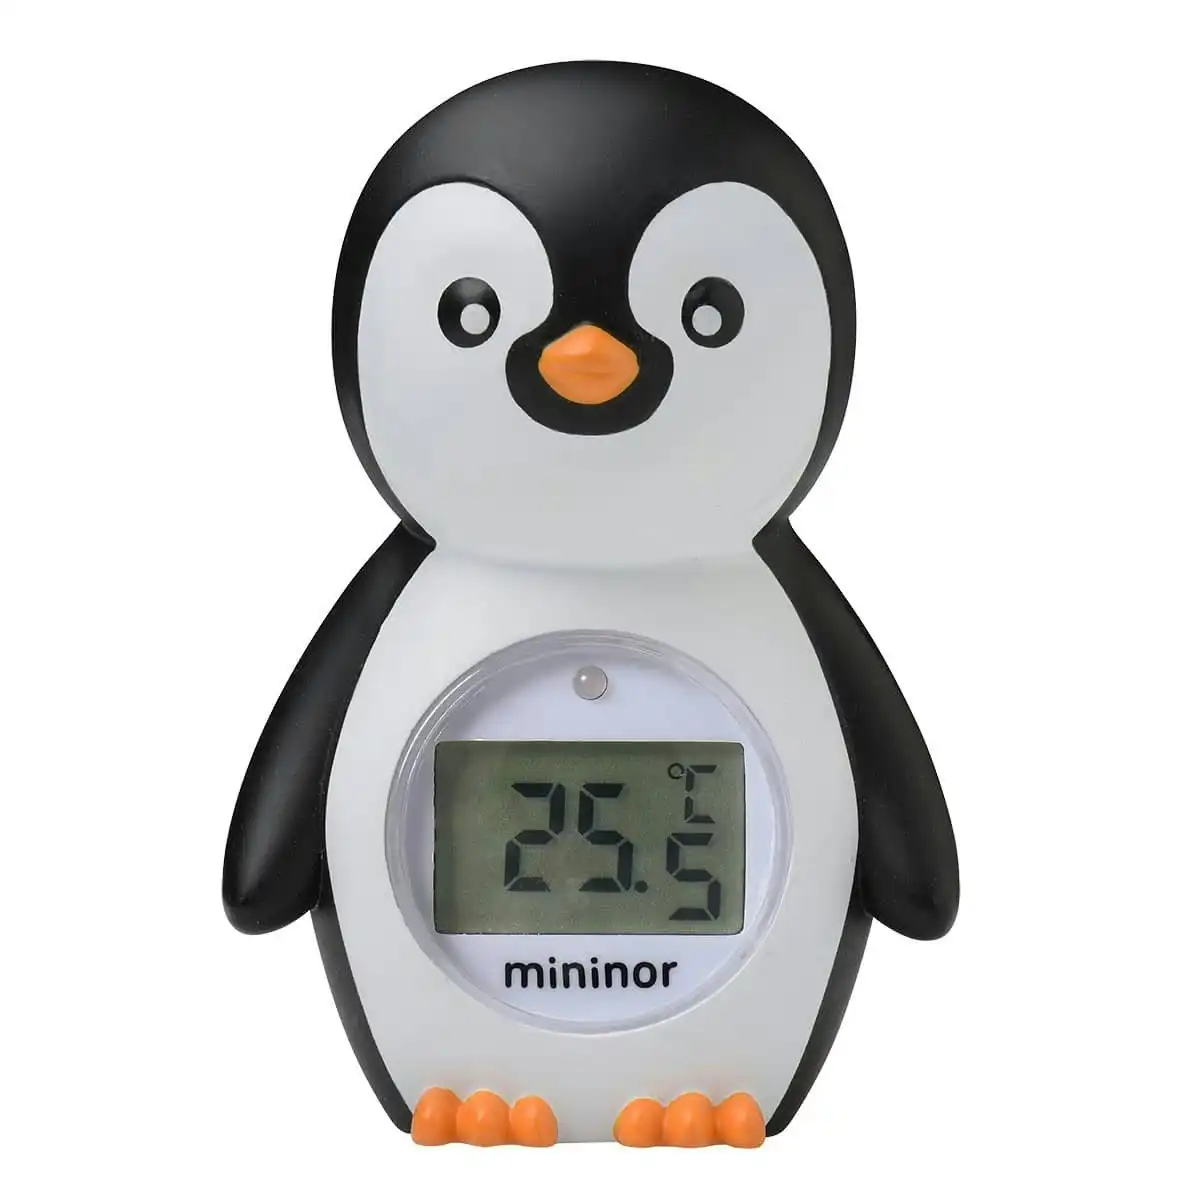 Mininor Baby/Infant Bath/Shower Animal Toy Water Safety Thermometer Penguin